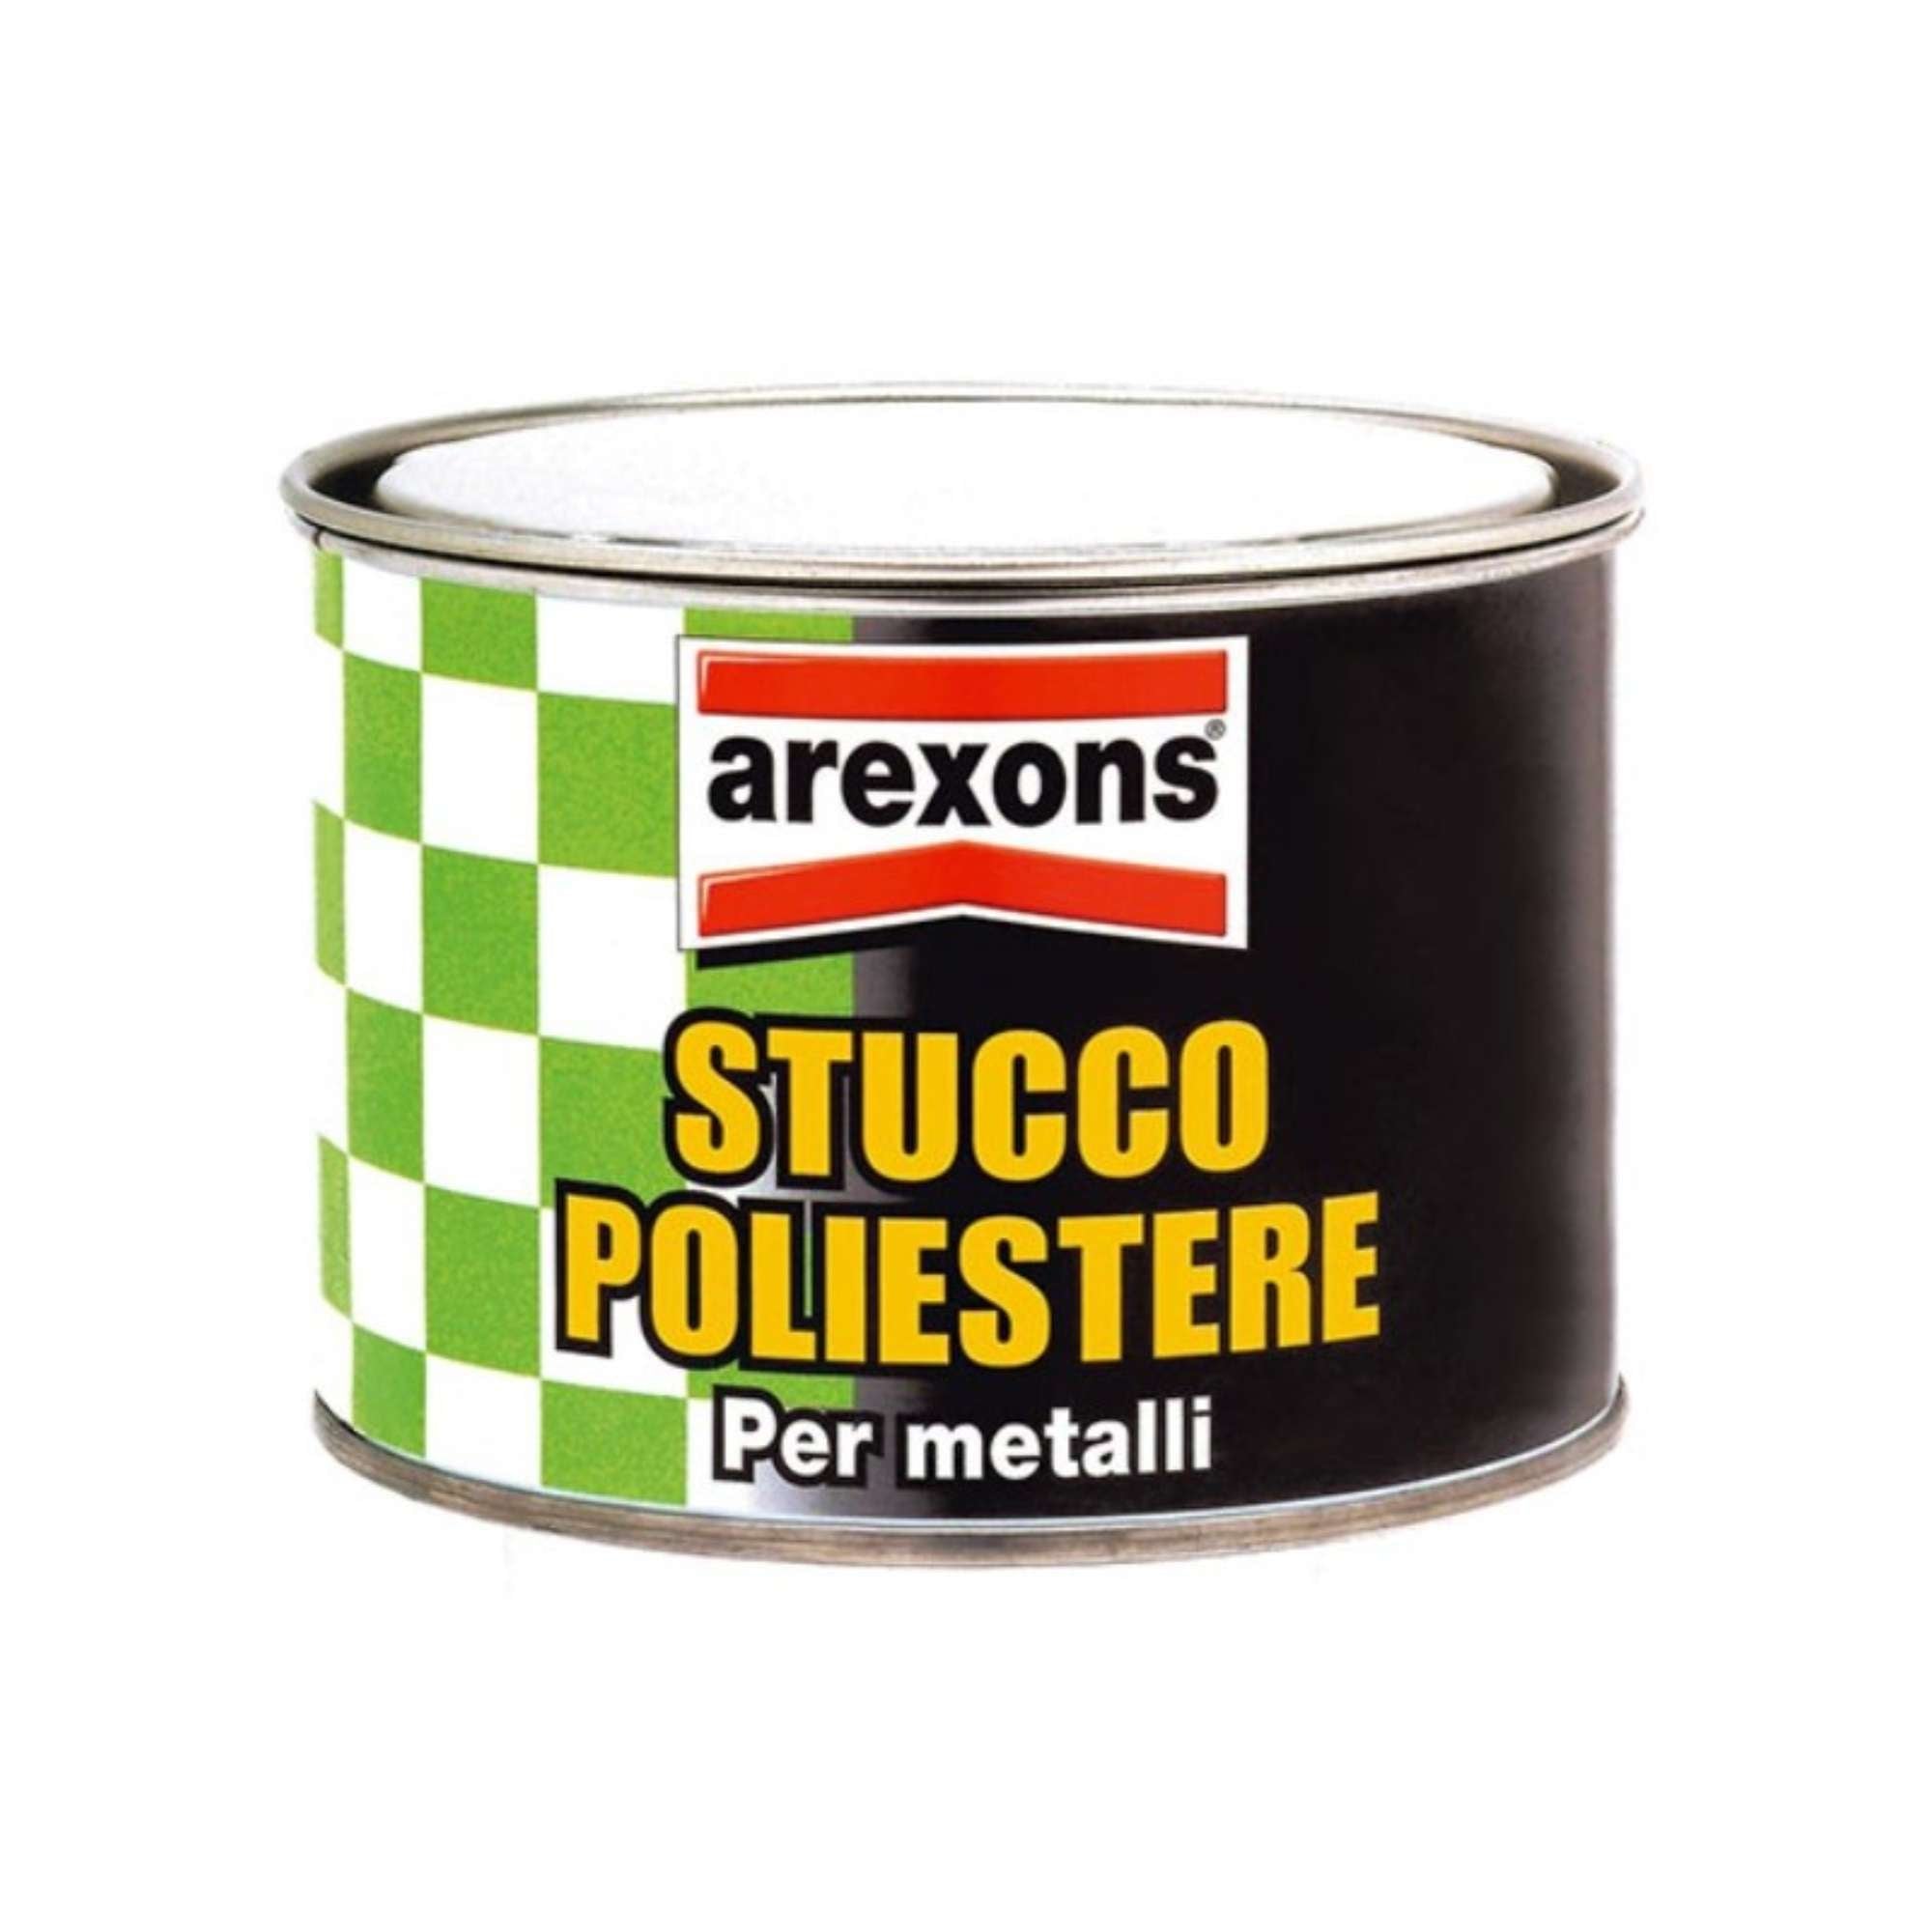 Polyester putty for metals - Arexons